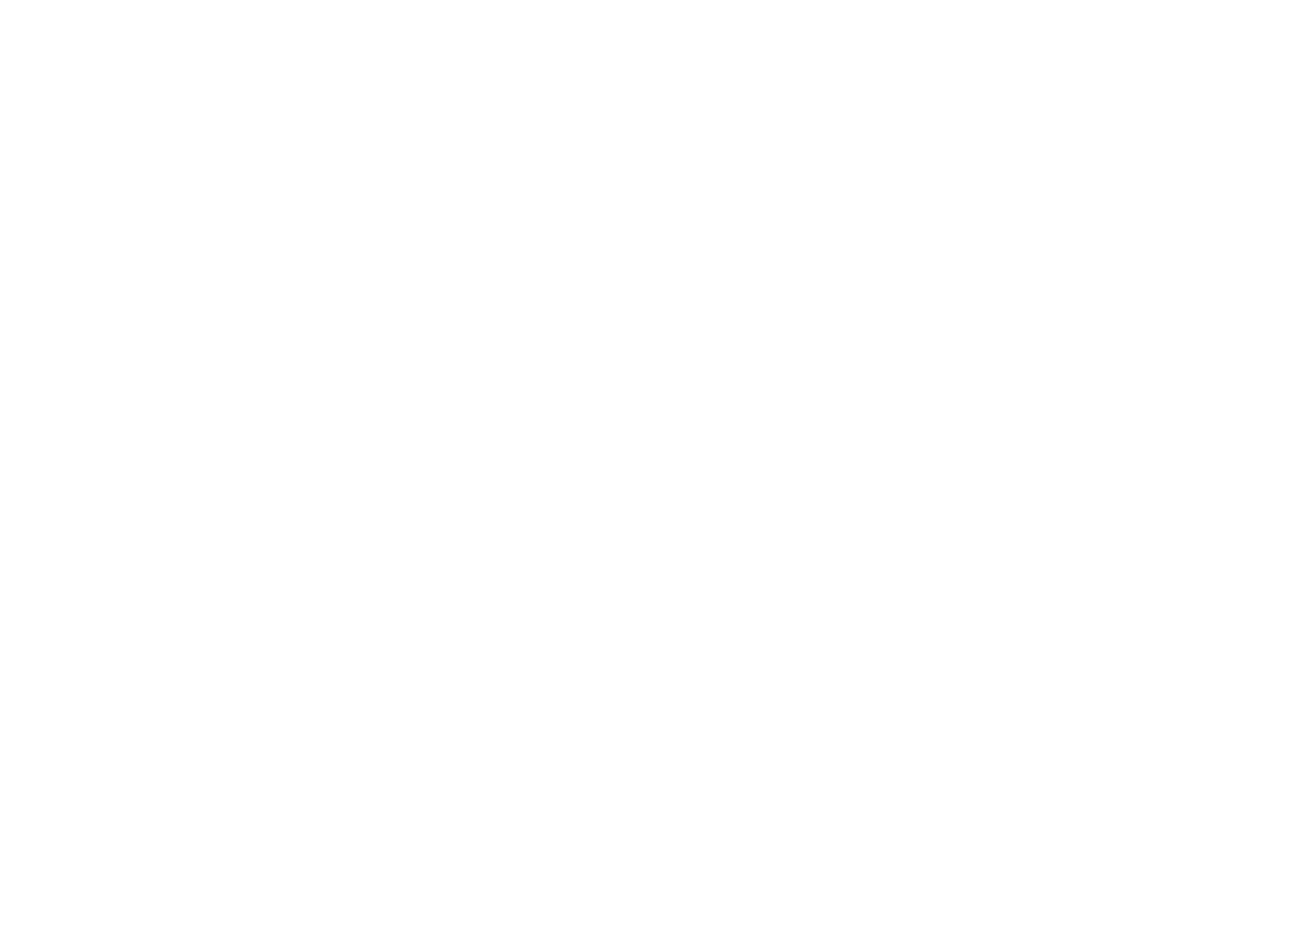 Micropods are installed in the classrooms providing a real life learning activity in the everyday teaching environmen...